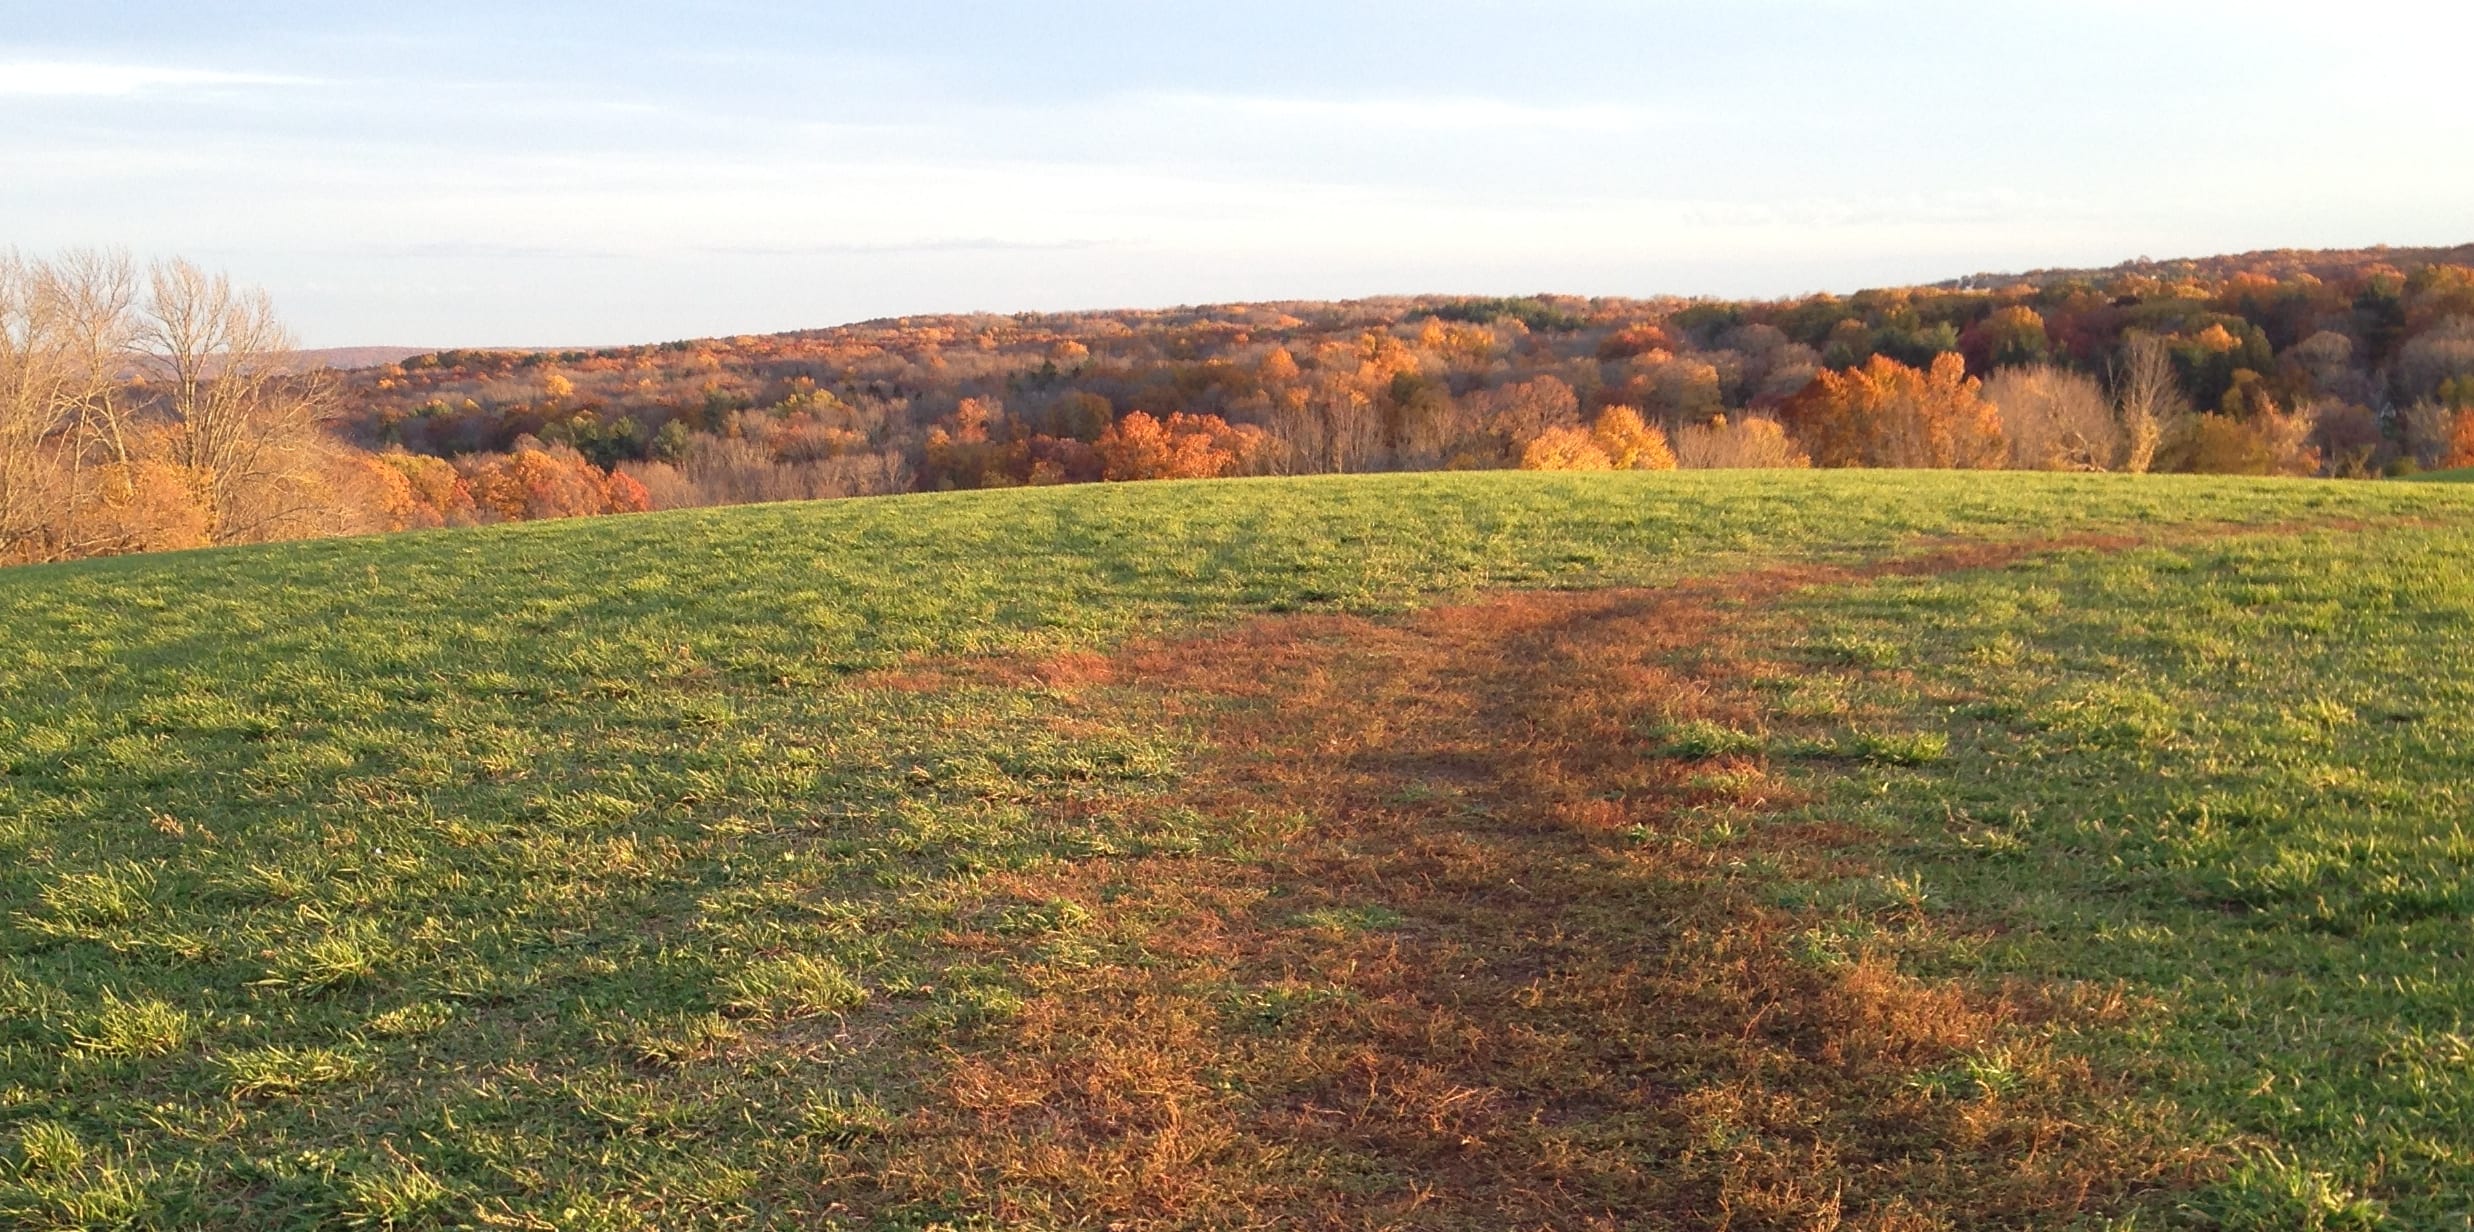 Bucolic Horse Barn Hill overlooks the UConn campus, where a panel on Writing and Publishing Kids Lit will take place on Friday, November 13th, 2015